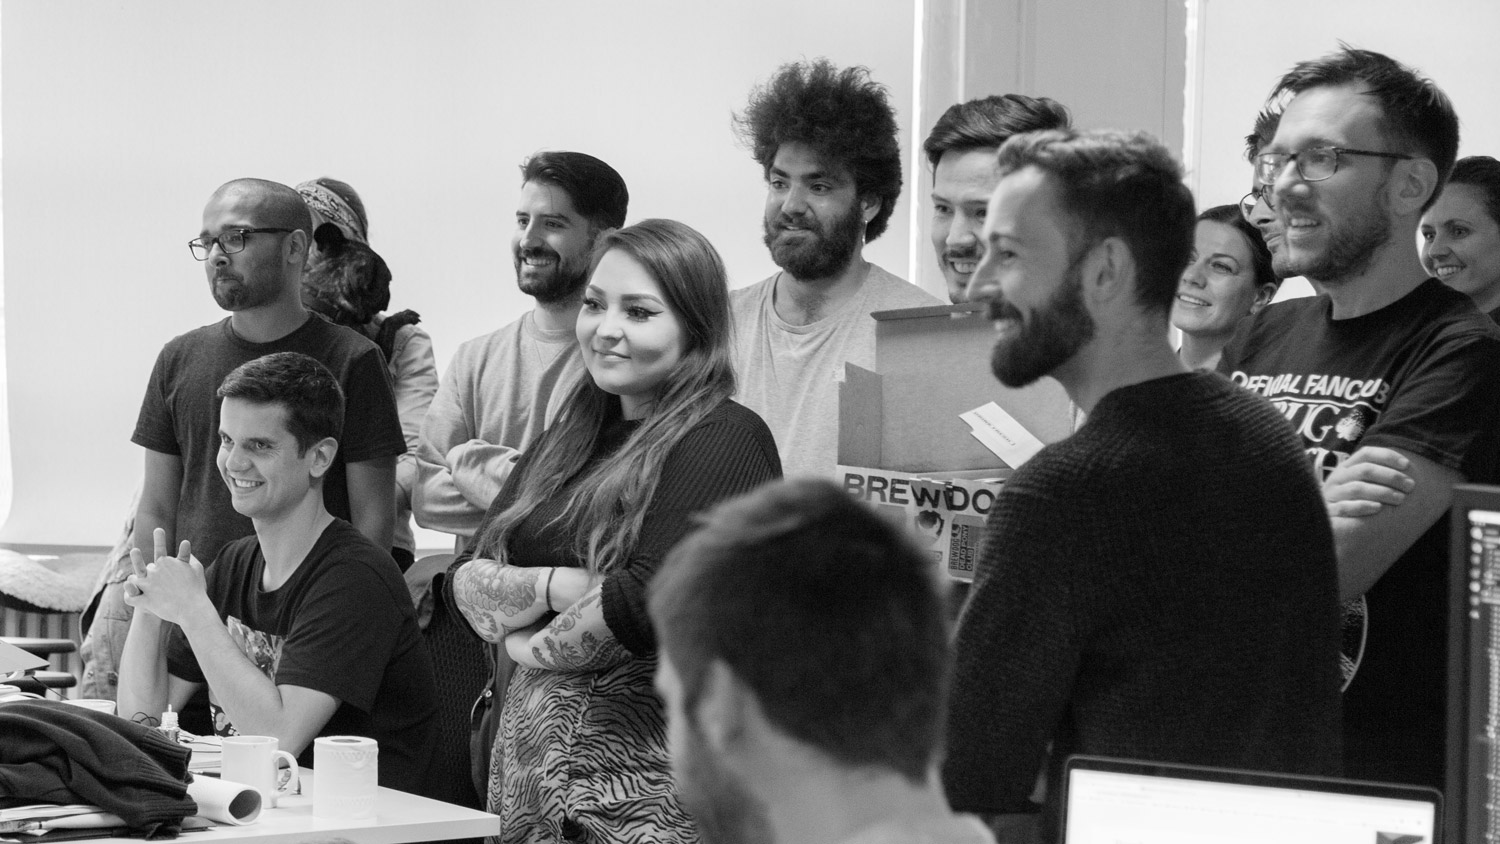 Large group of smiling colleagues in an office looking at someone speaking